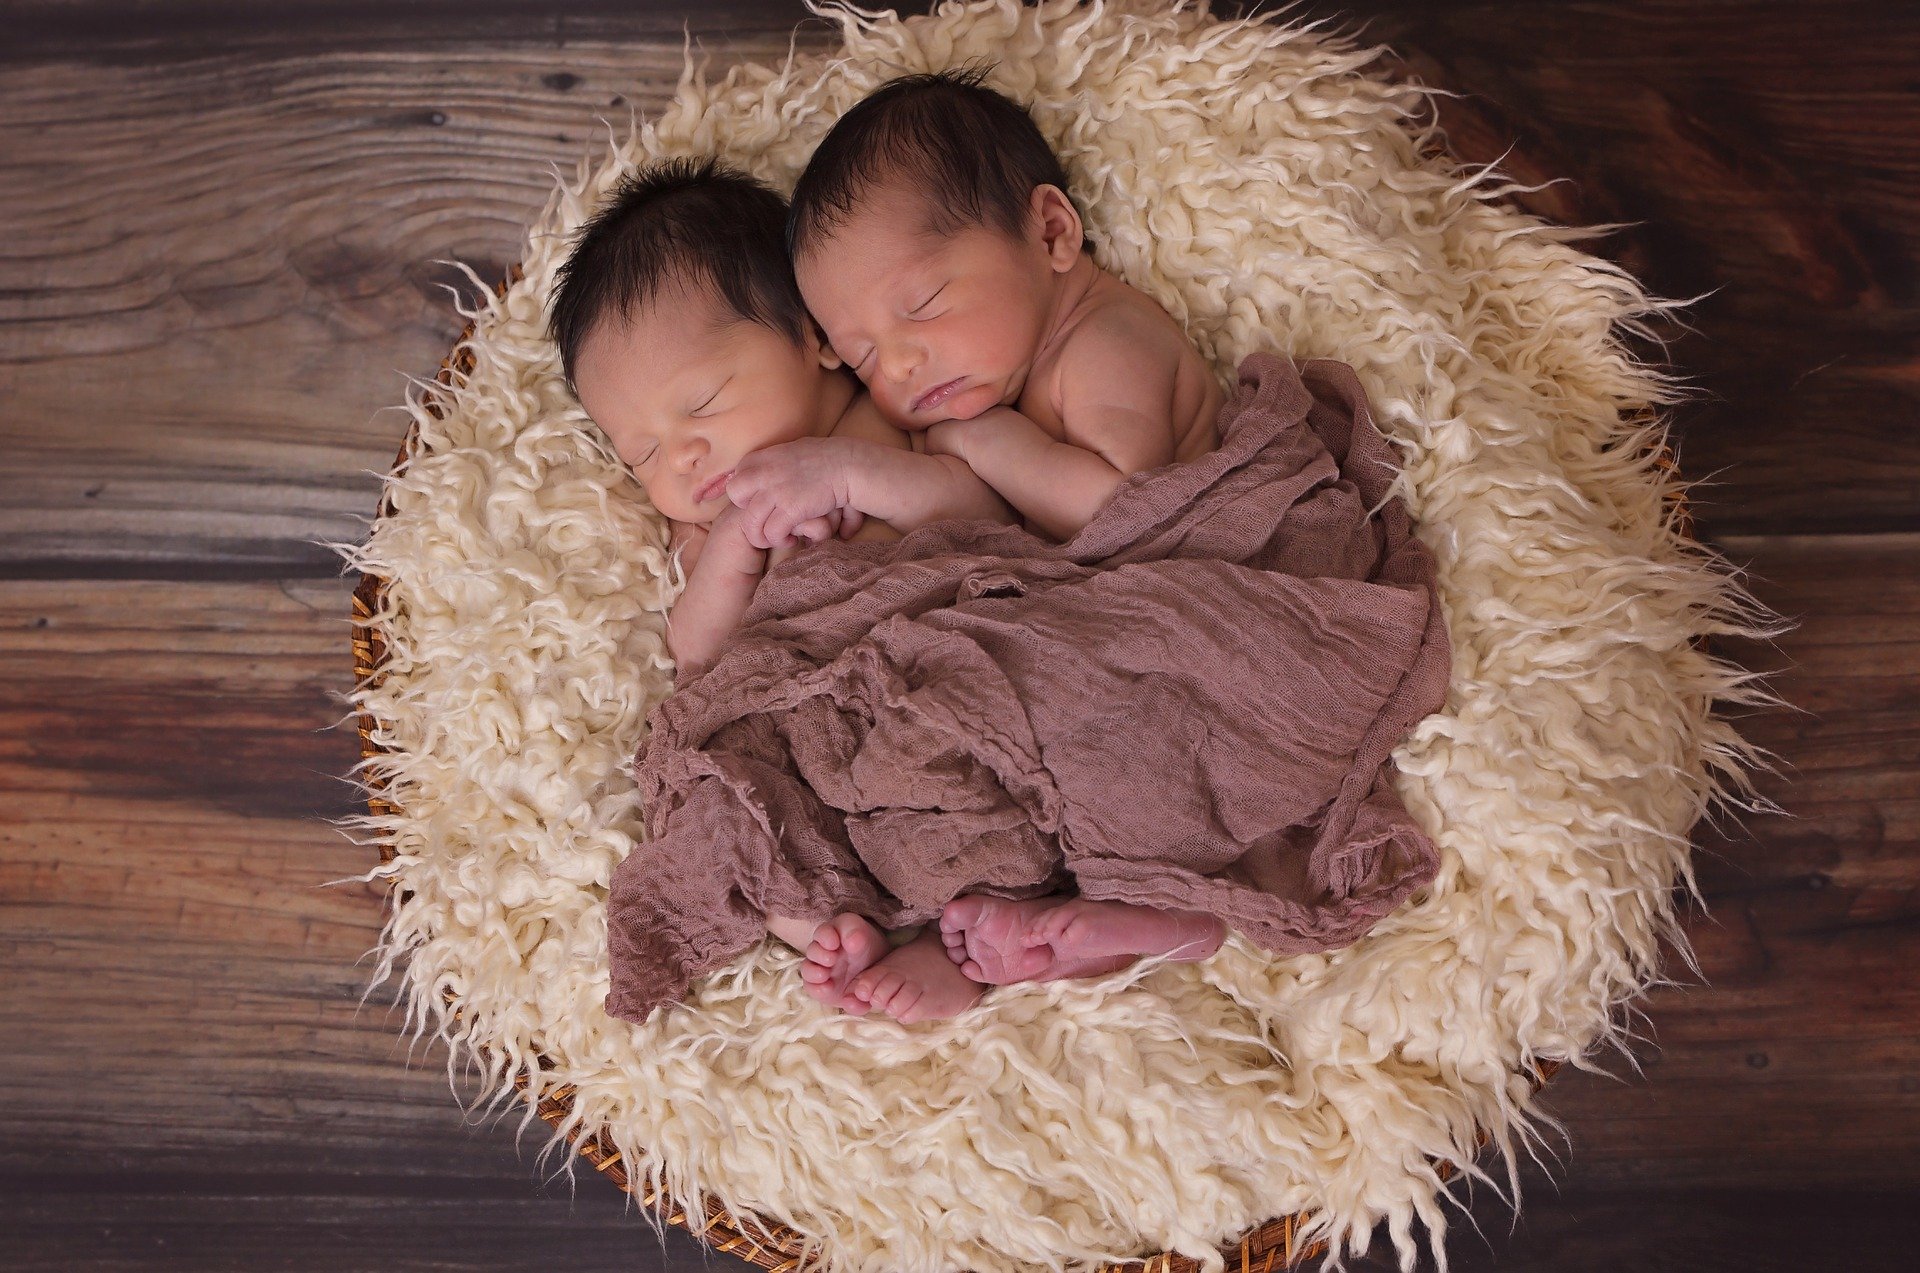 Pictured - An image of newborn twin baby boys sleeping | Source: Pixabay 